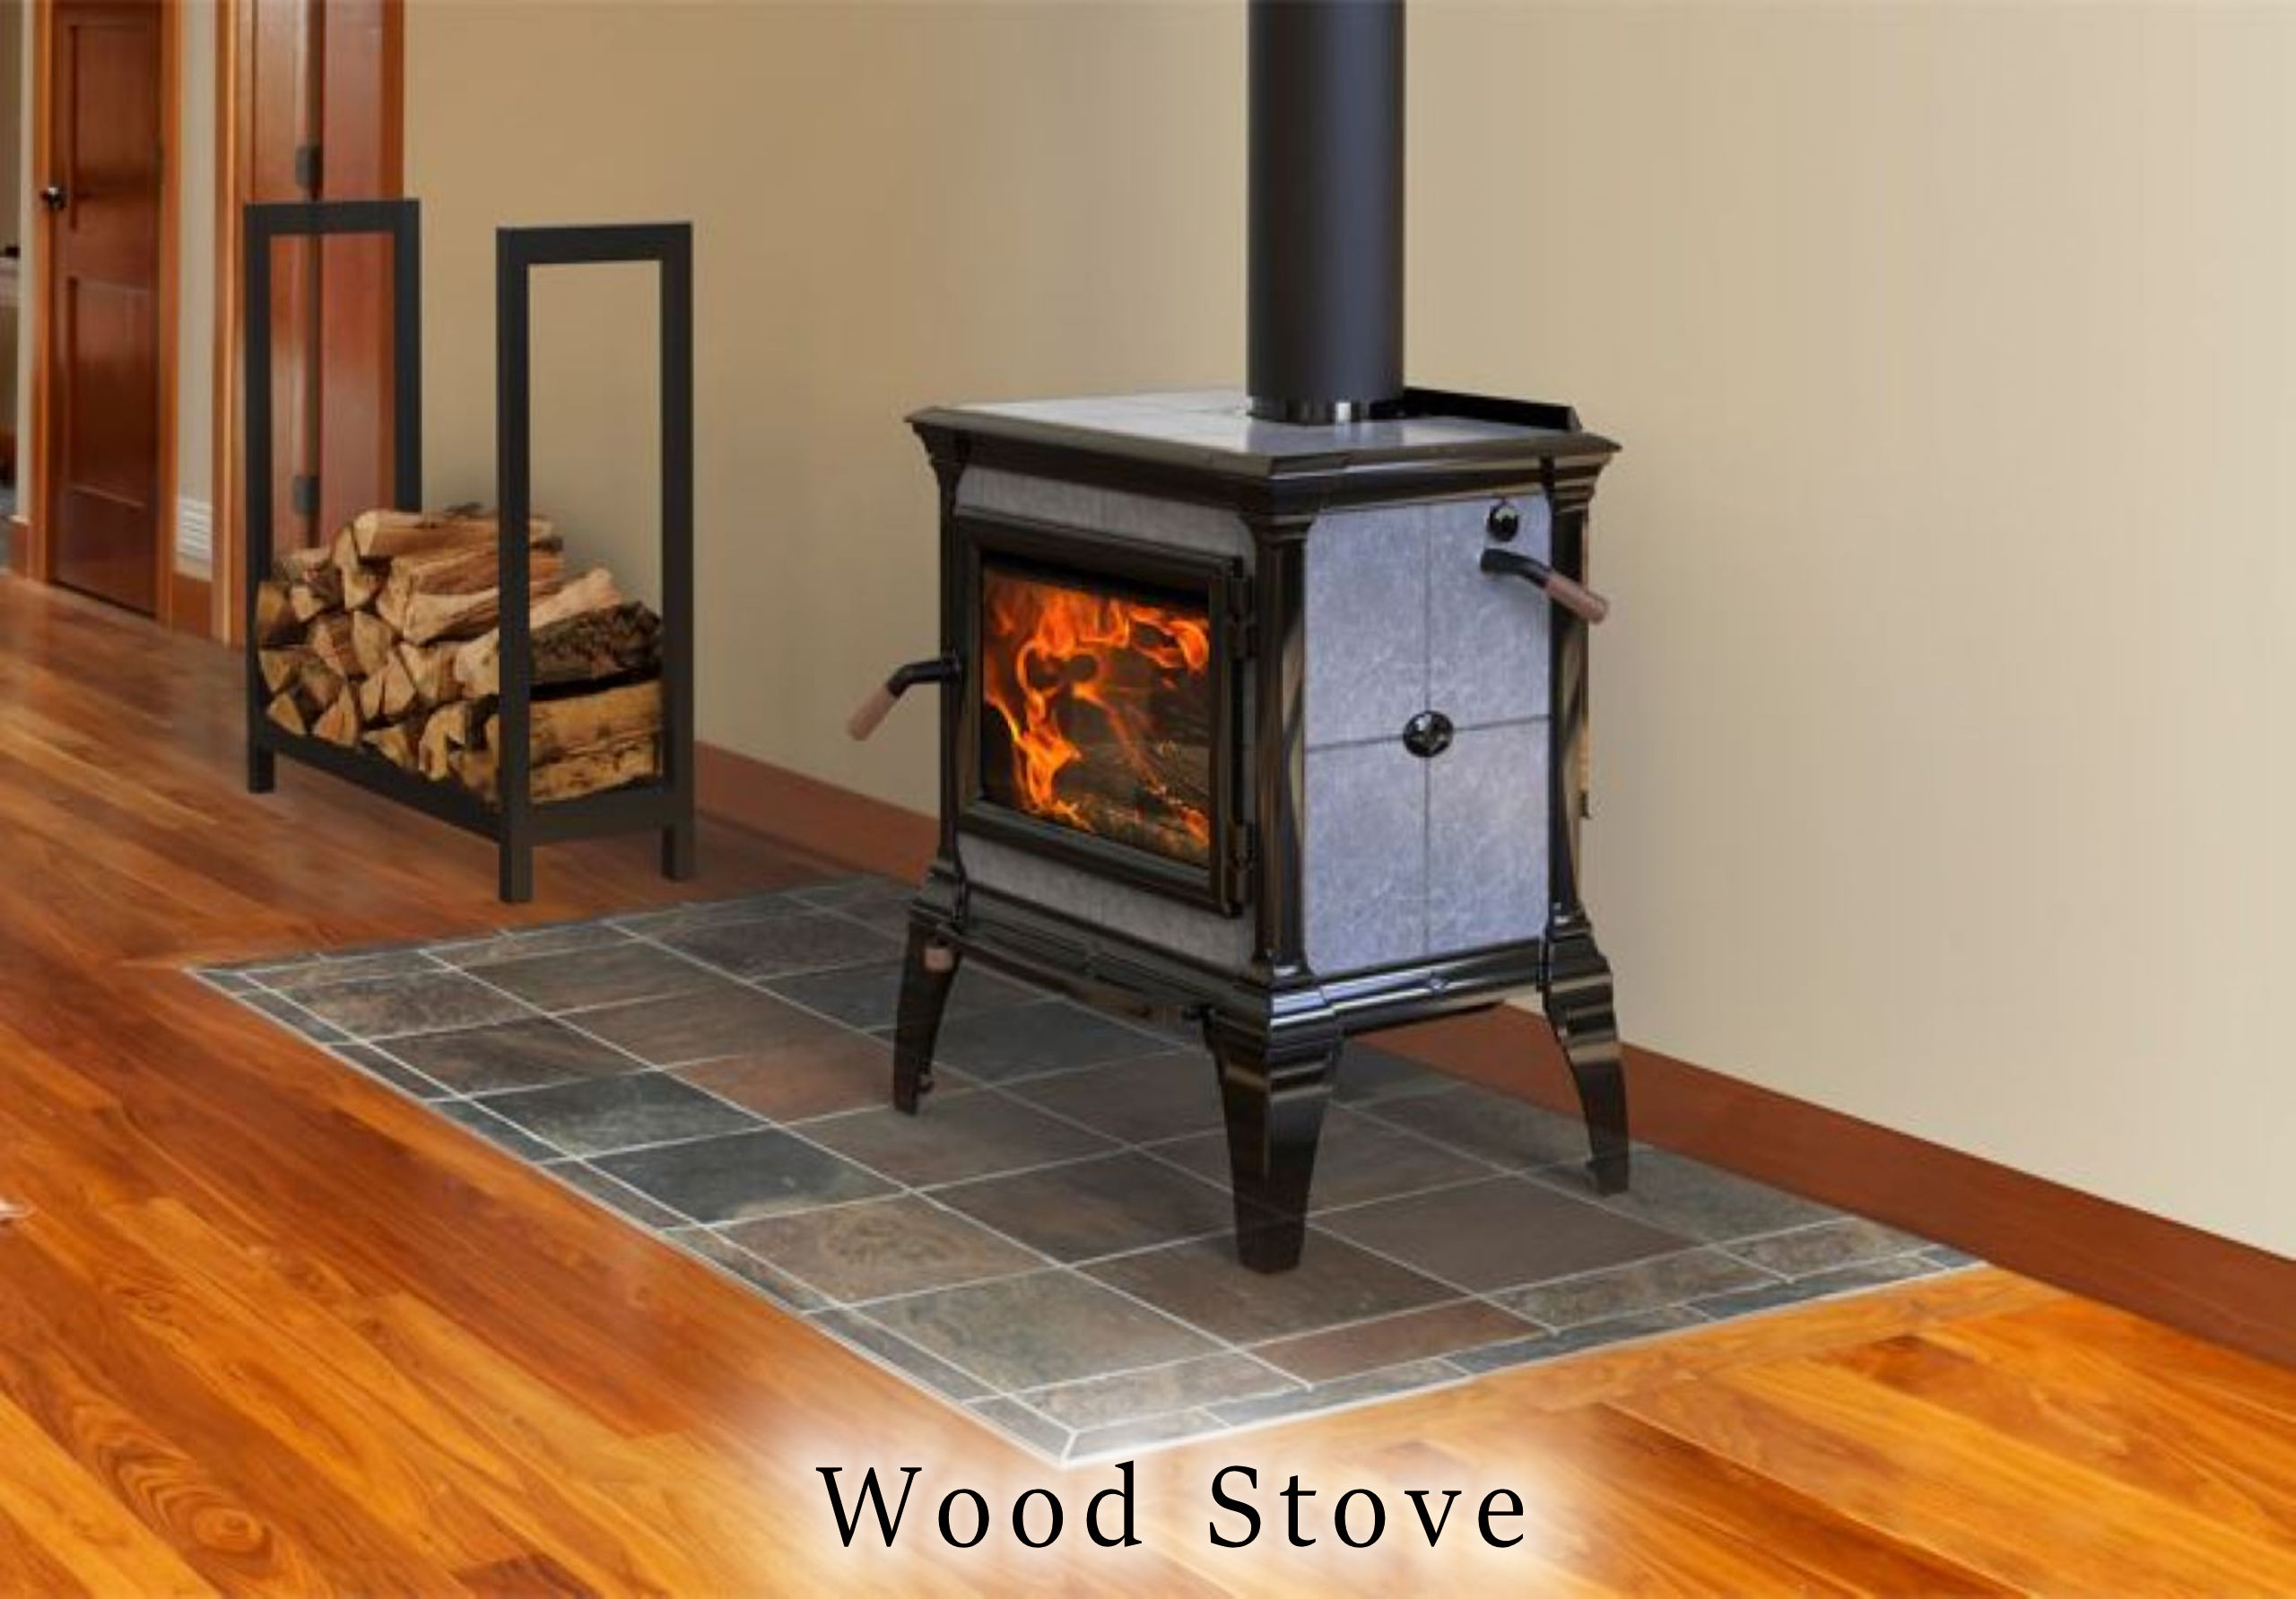 Wood Stove Thermometers  Classic Wood Stove Thermometer